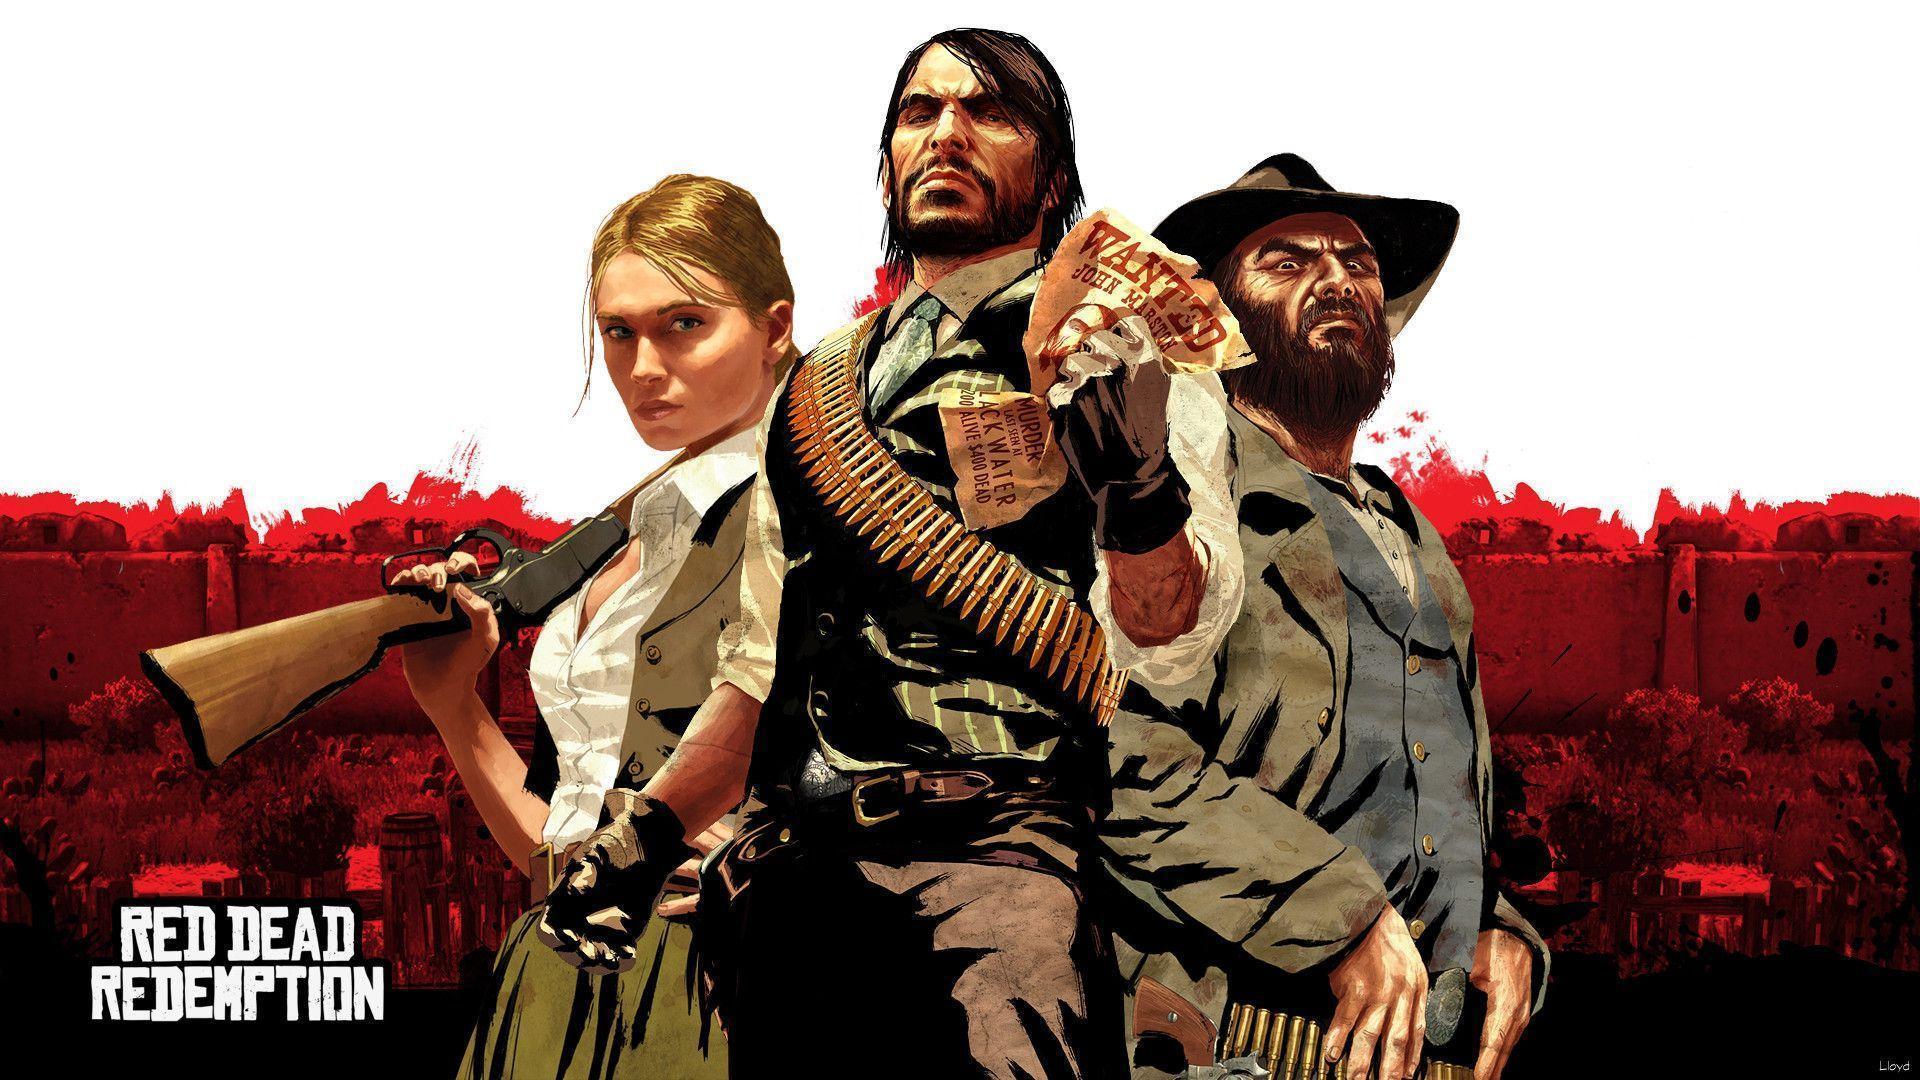 Red Dead Redemption Wallpaper for Xbox 360 Wallpaper HD